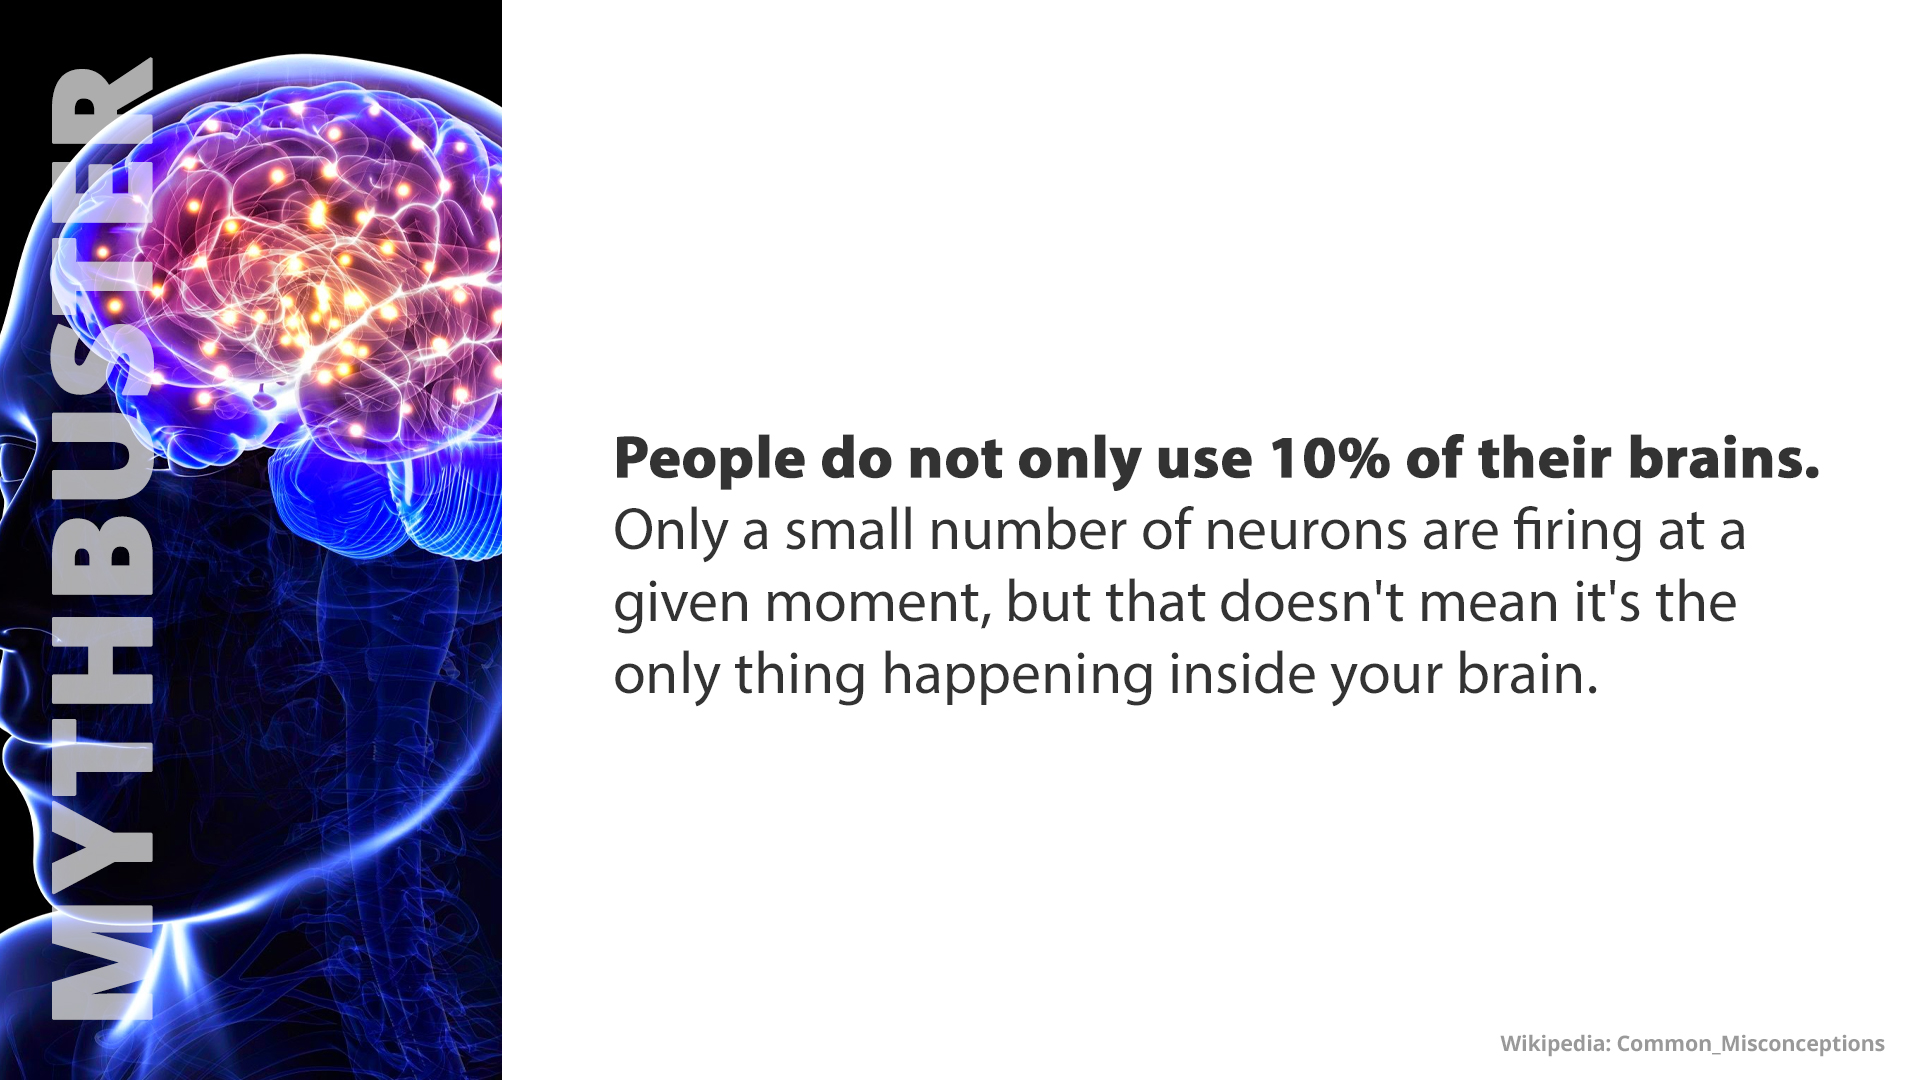 Free Graphic | Mythbusters | People use more than 10% of their brains